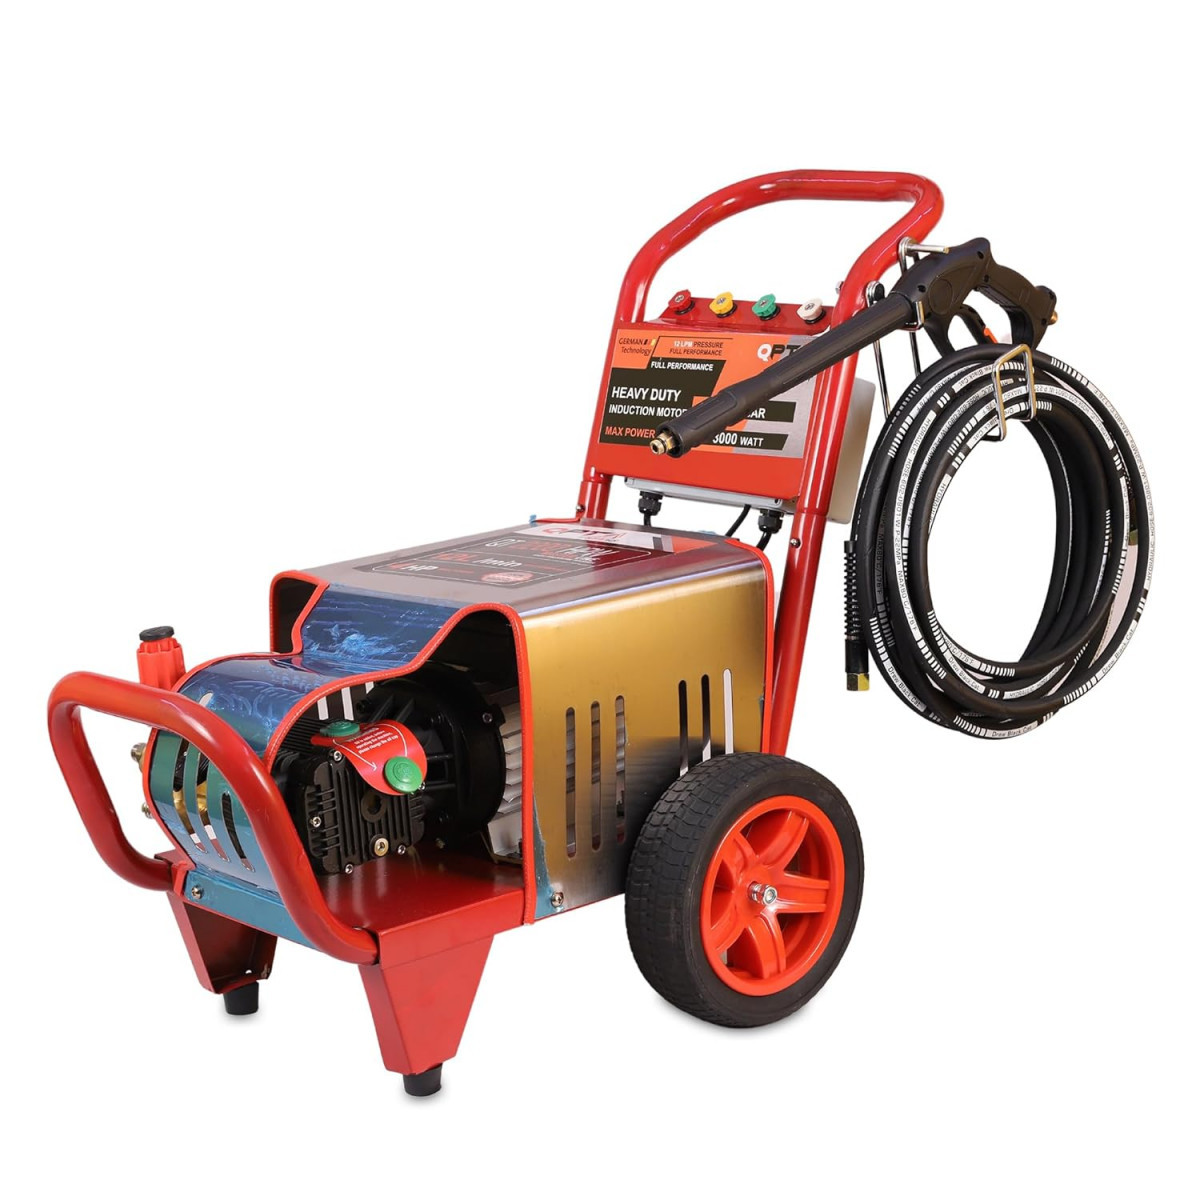 QPT by STARQ QT2200HPW Commercial HIGH Pressure Washer 4HP Single Phase 3000WATT 220BAR Pressure for CARBike Truck Washing